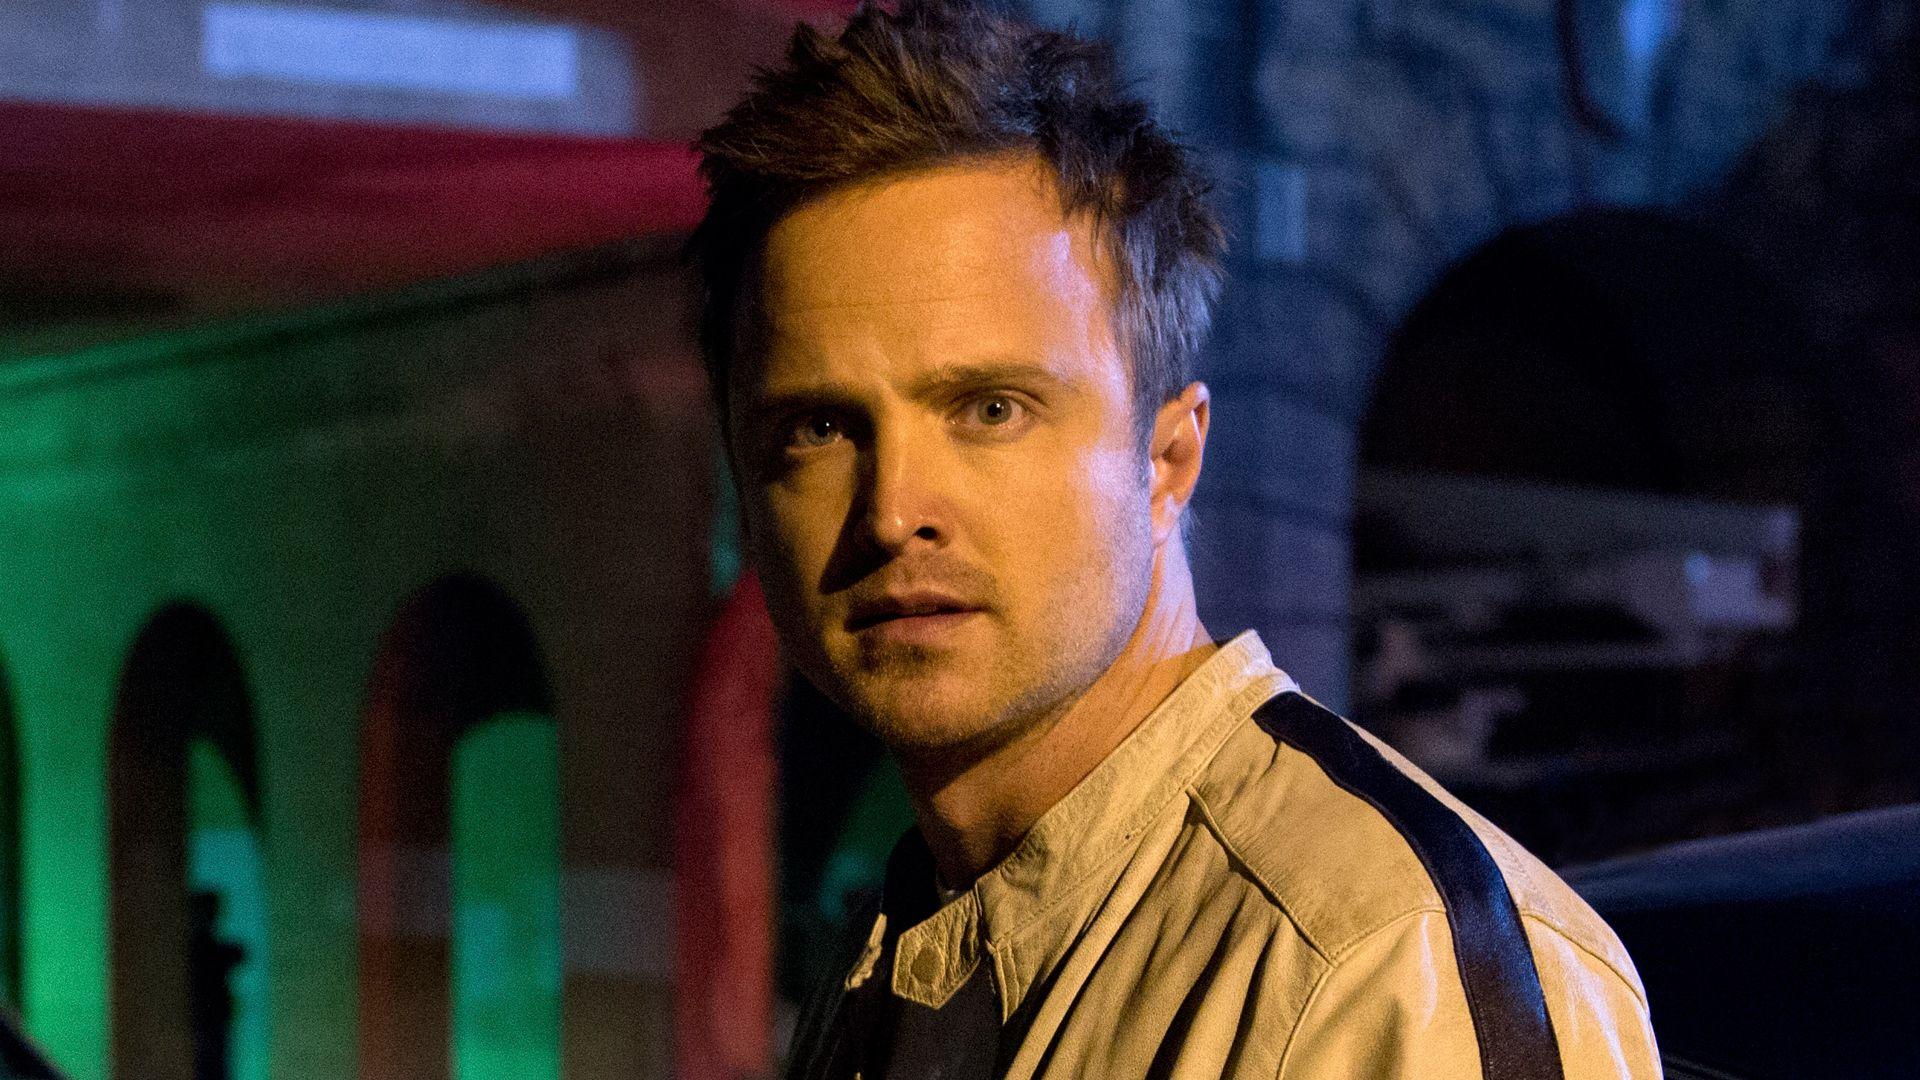 Aaron Paul Wallpaper Image Photo Picture Background